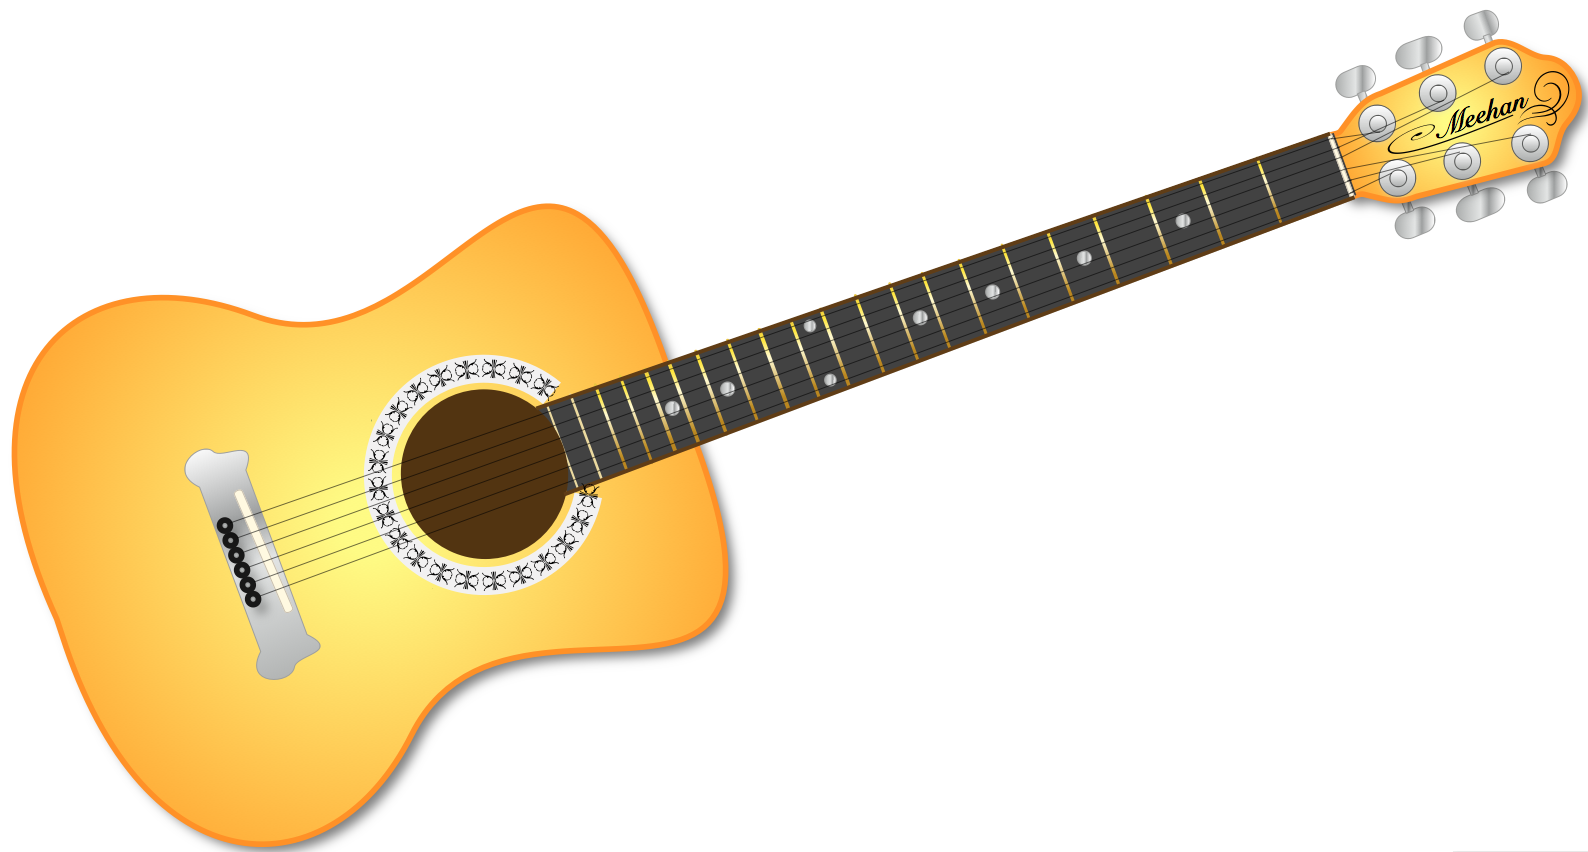 clipart of guitar - photo #18